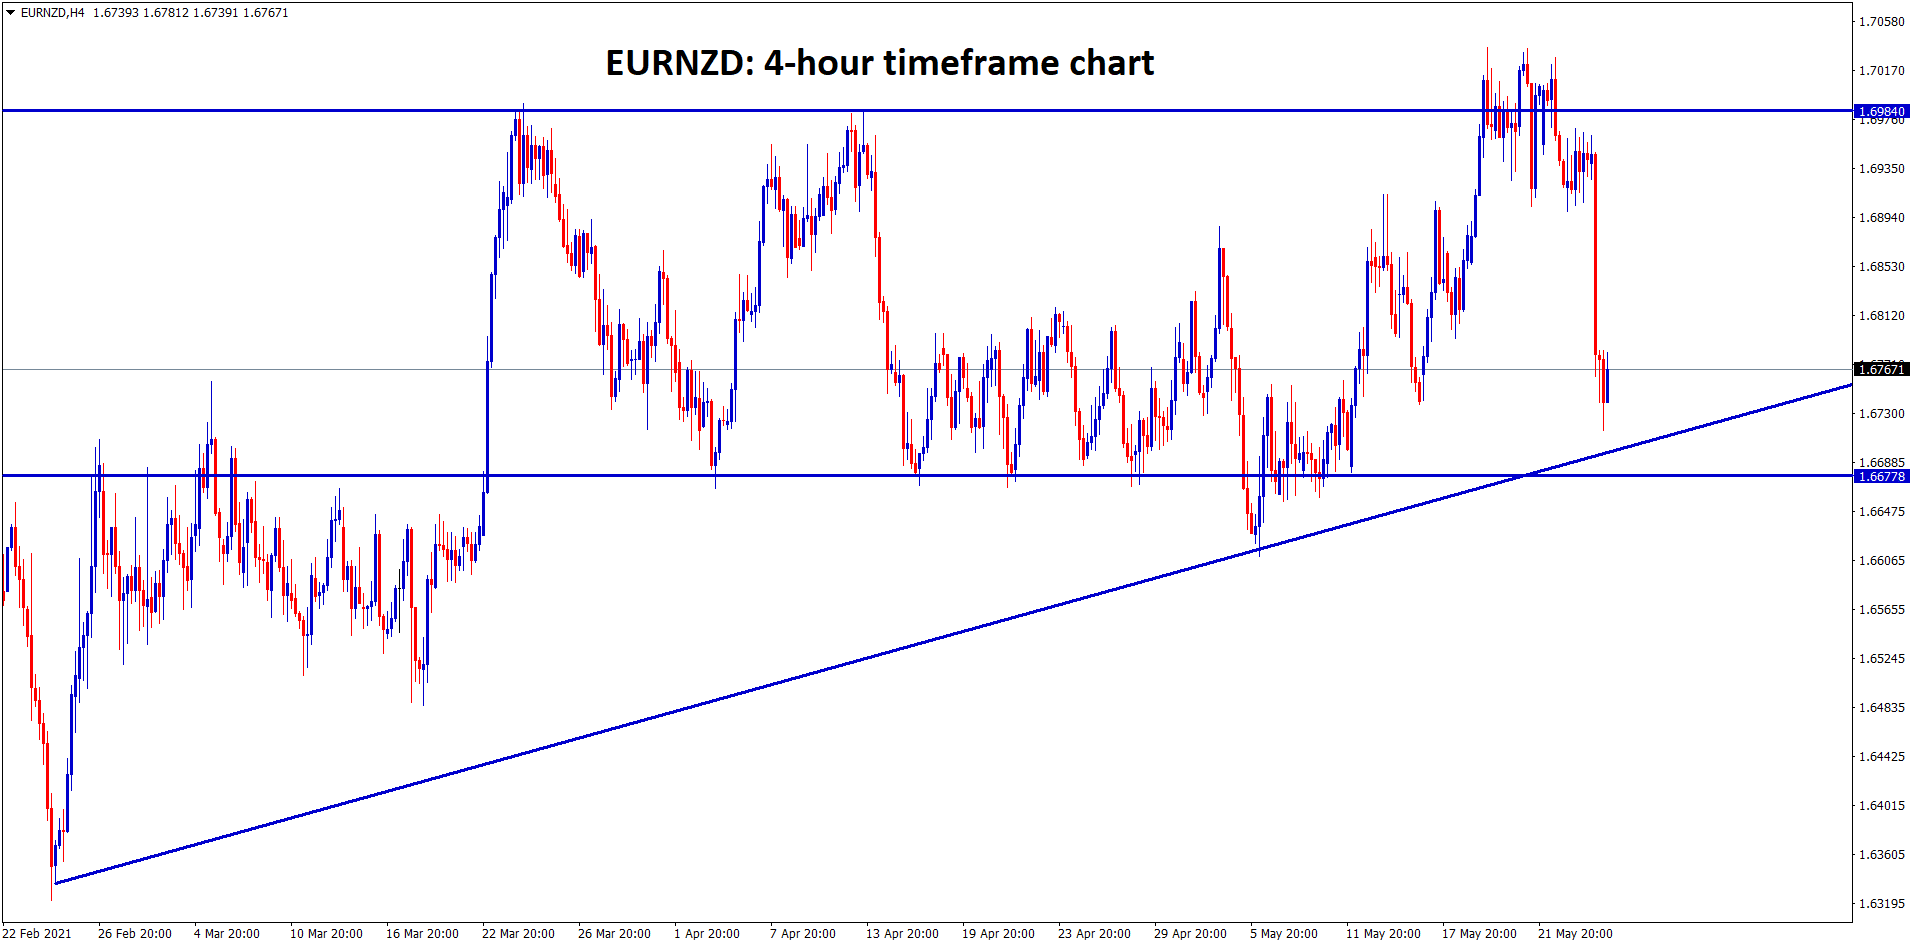 EURNZD going to reach the higher low and the horizontal support zone